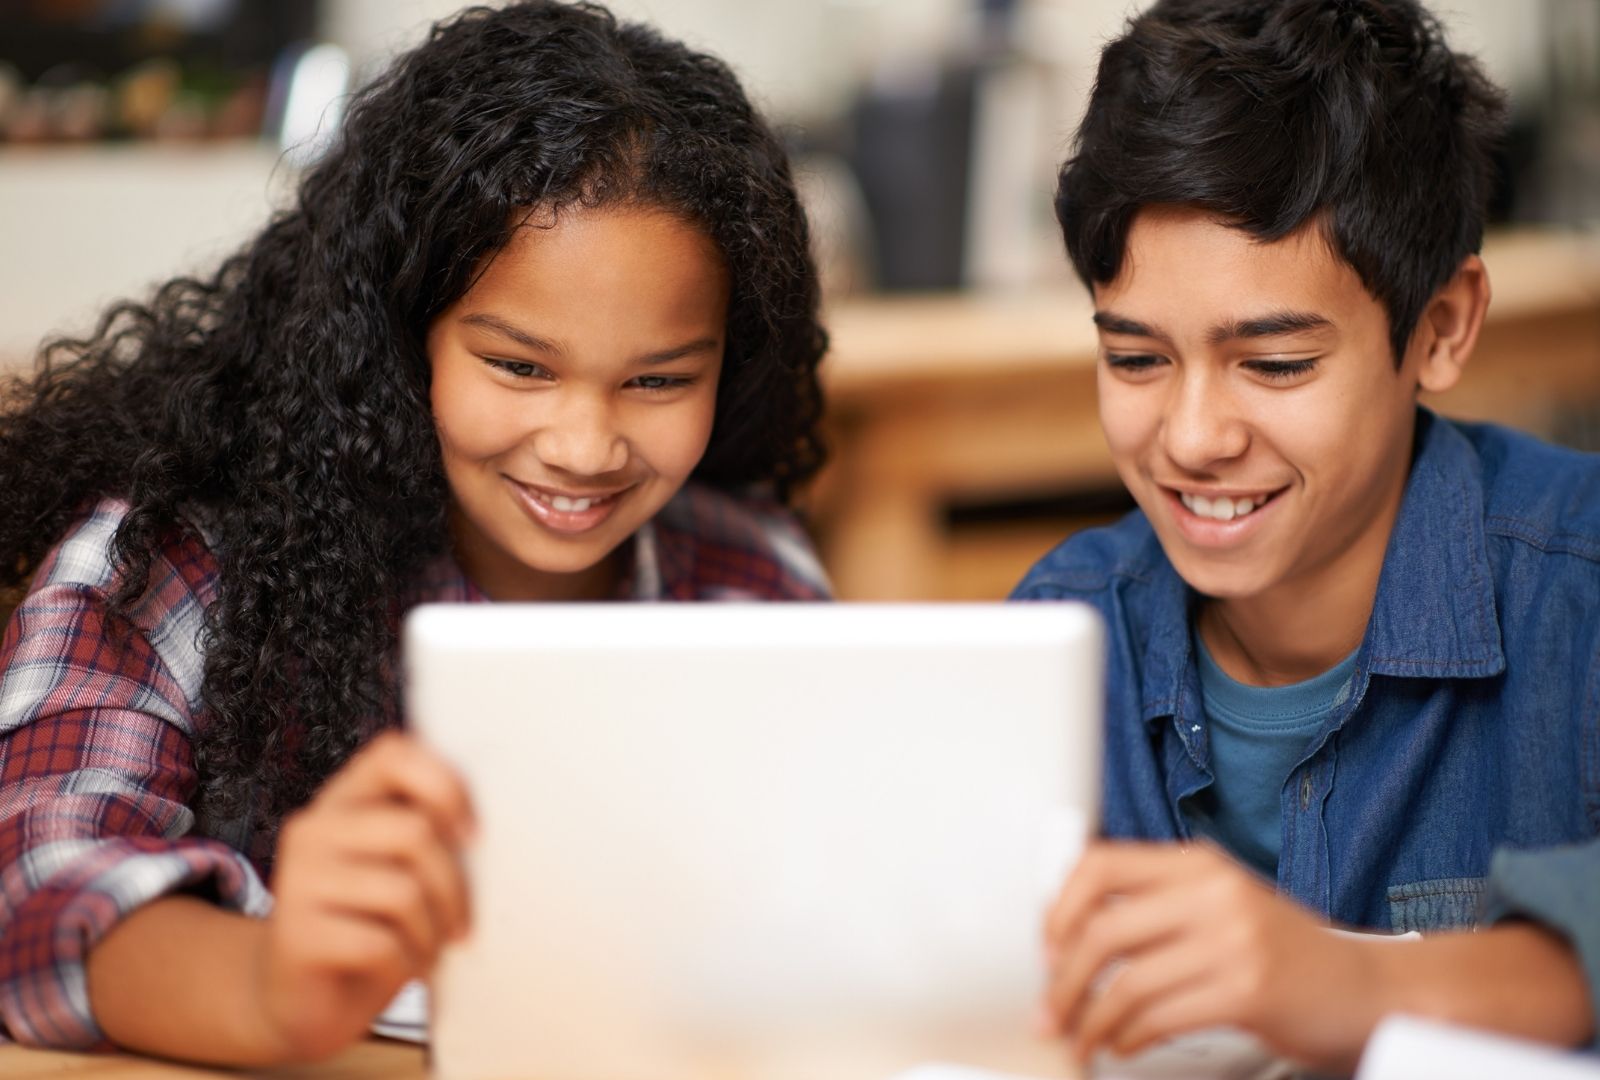 AT&T Launches Free Digital Learning Platform